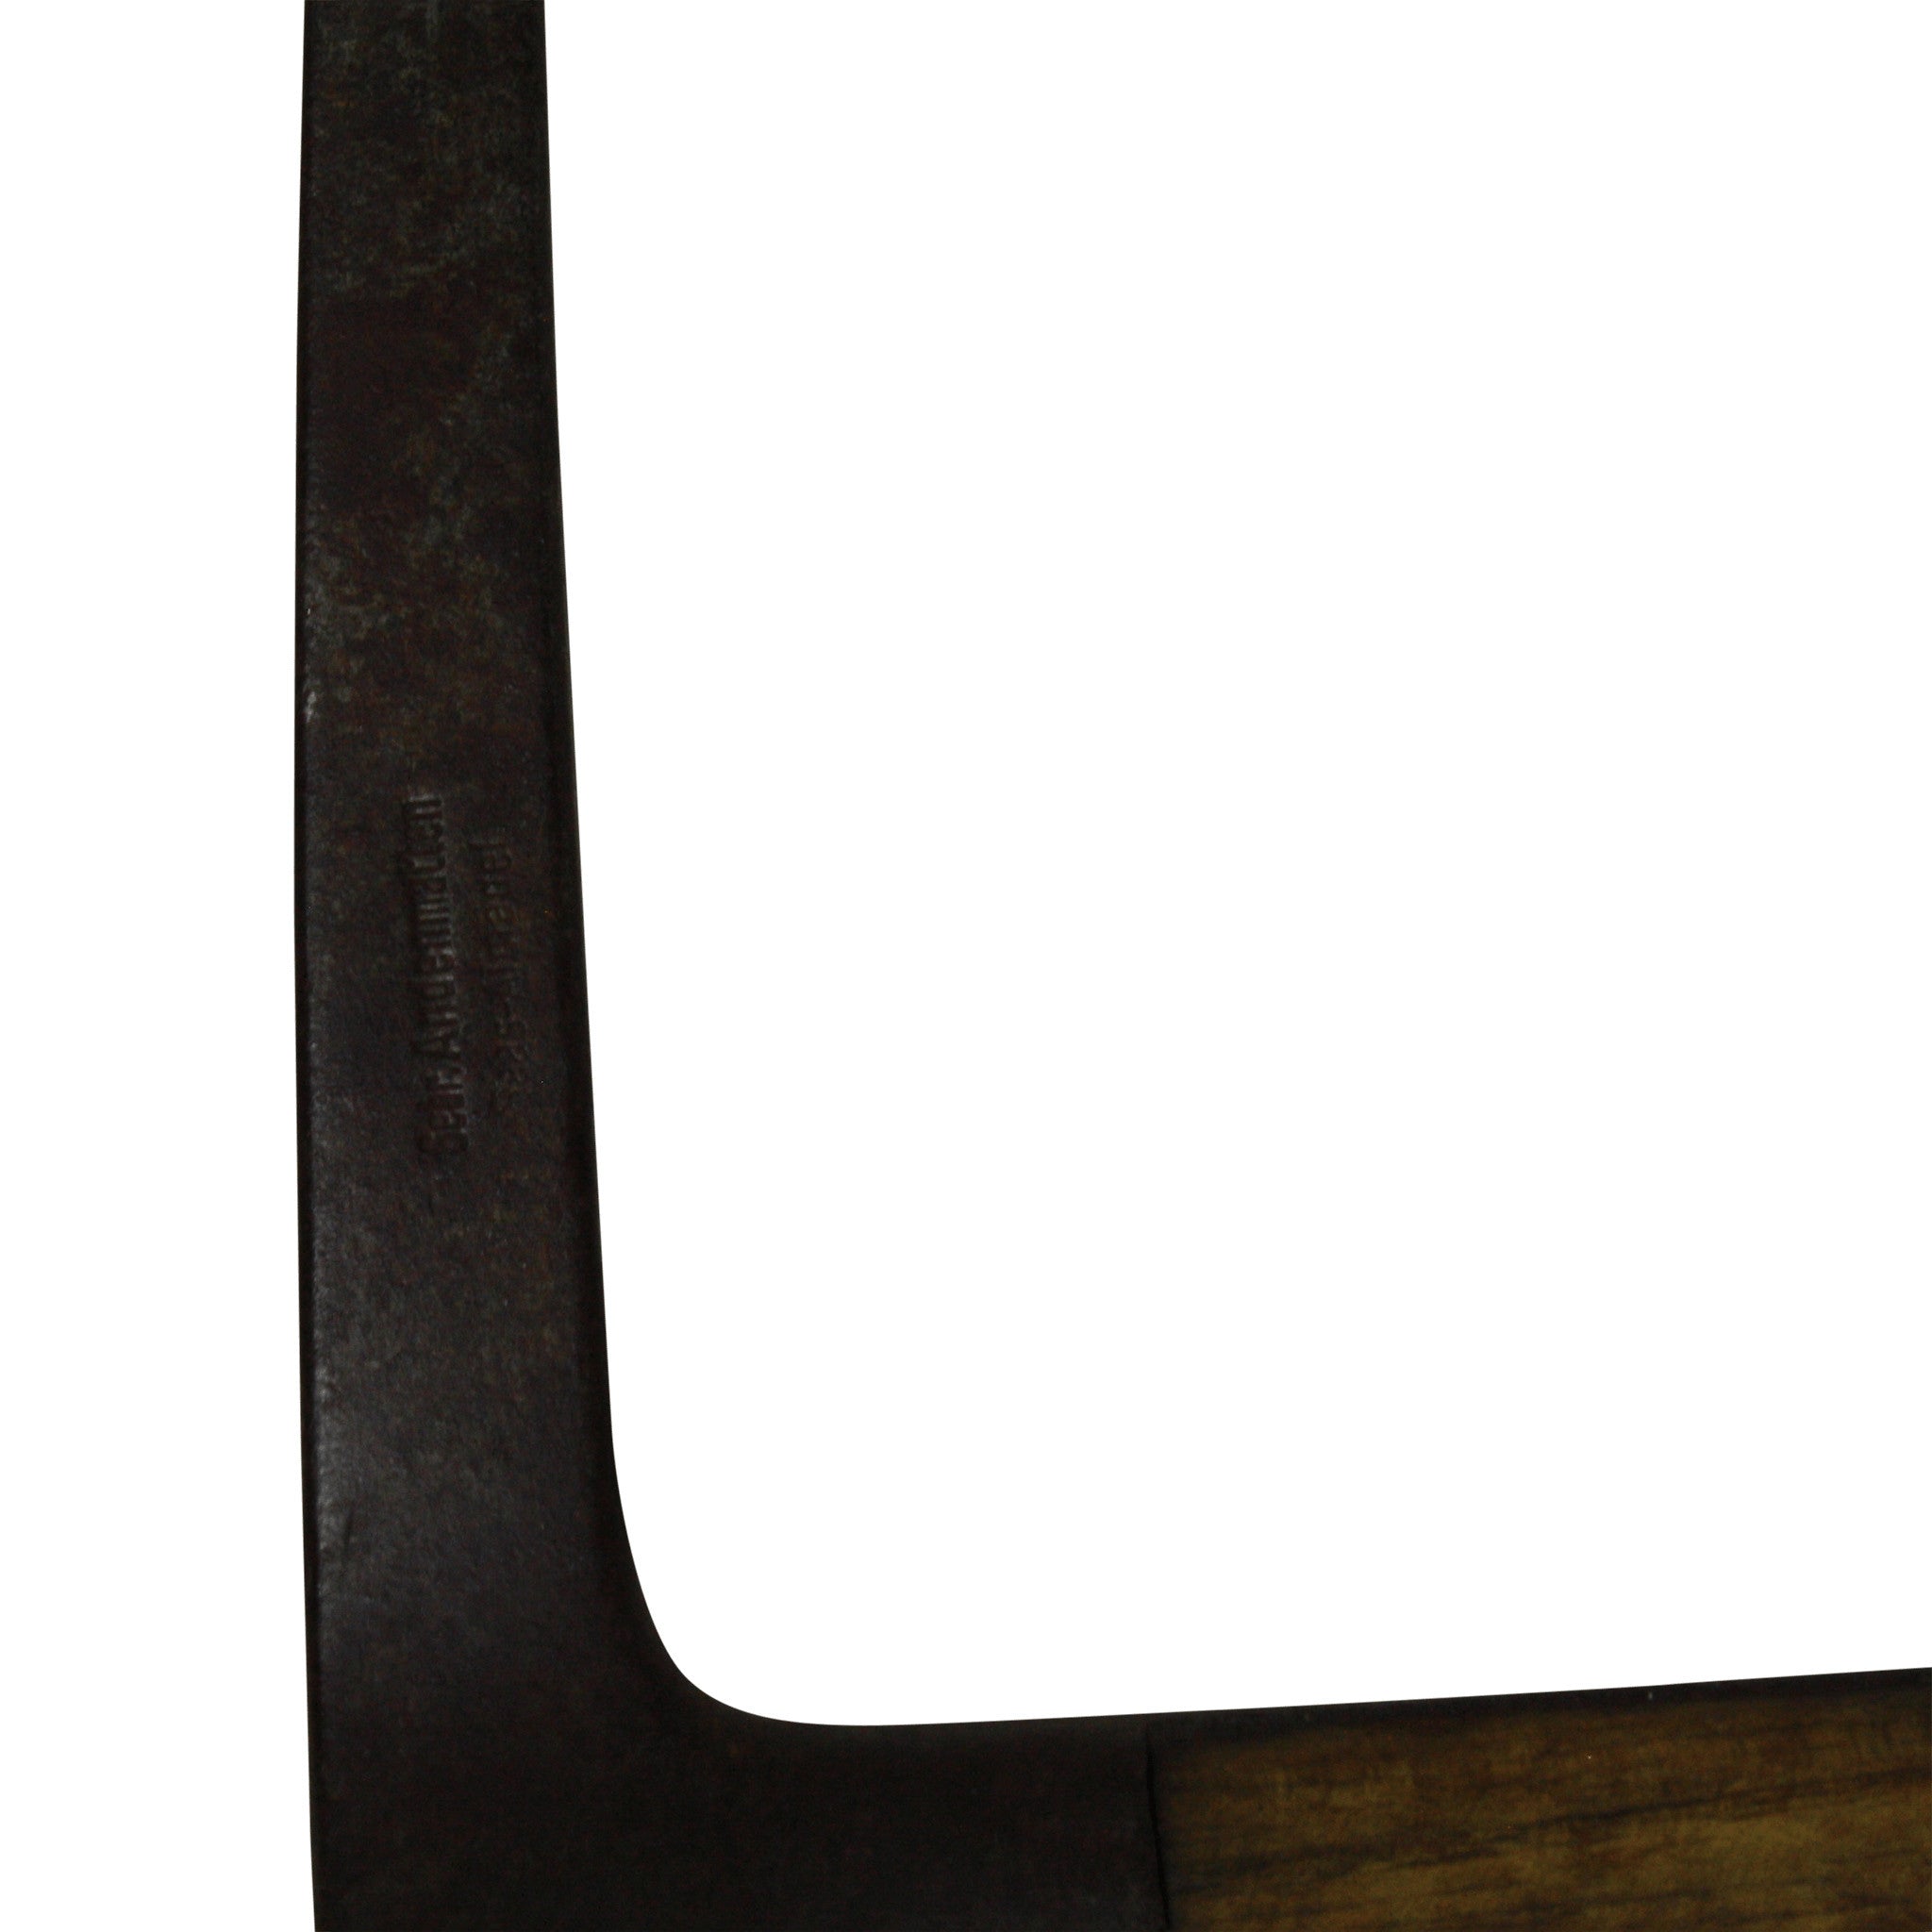 ski-country-antiques - Early Anddenmatten Bros. Ice Axe